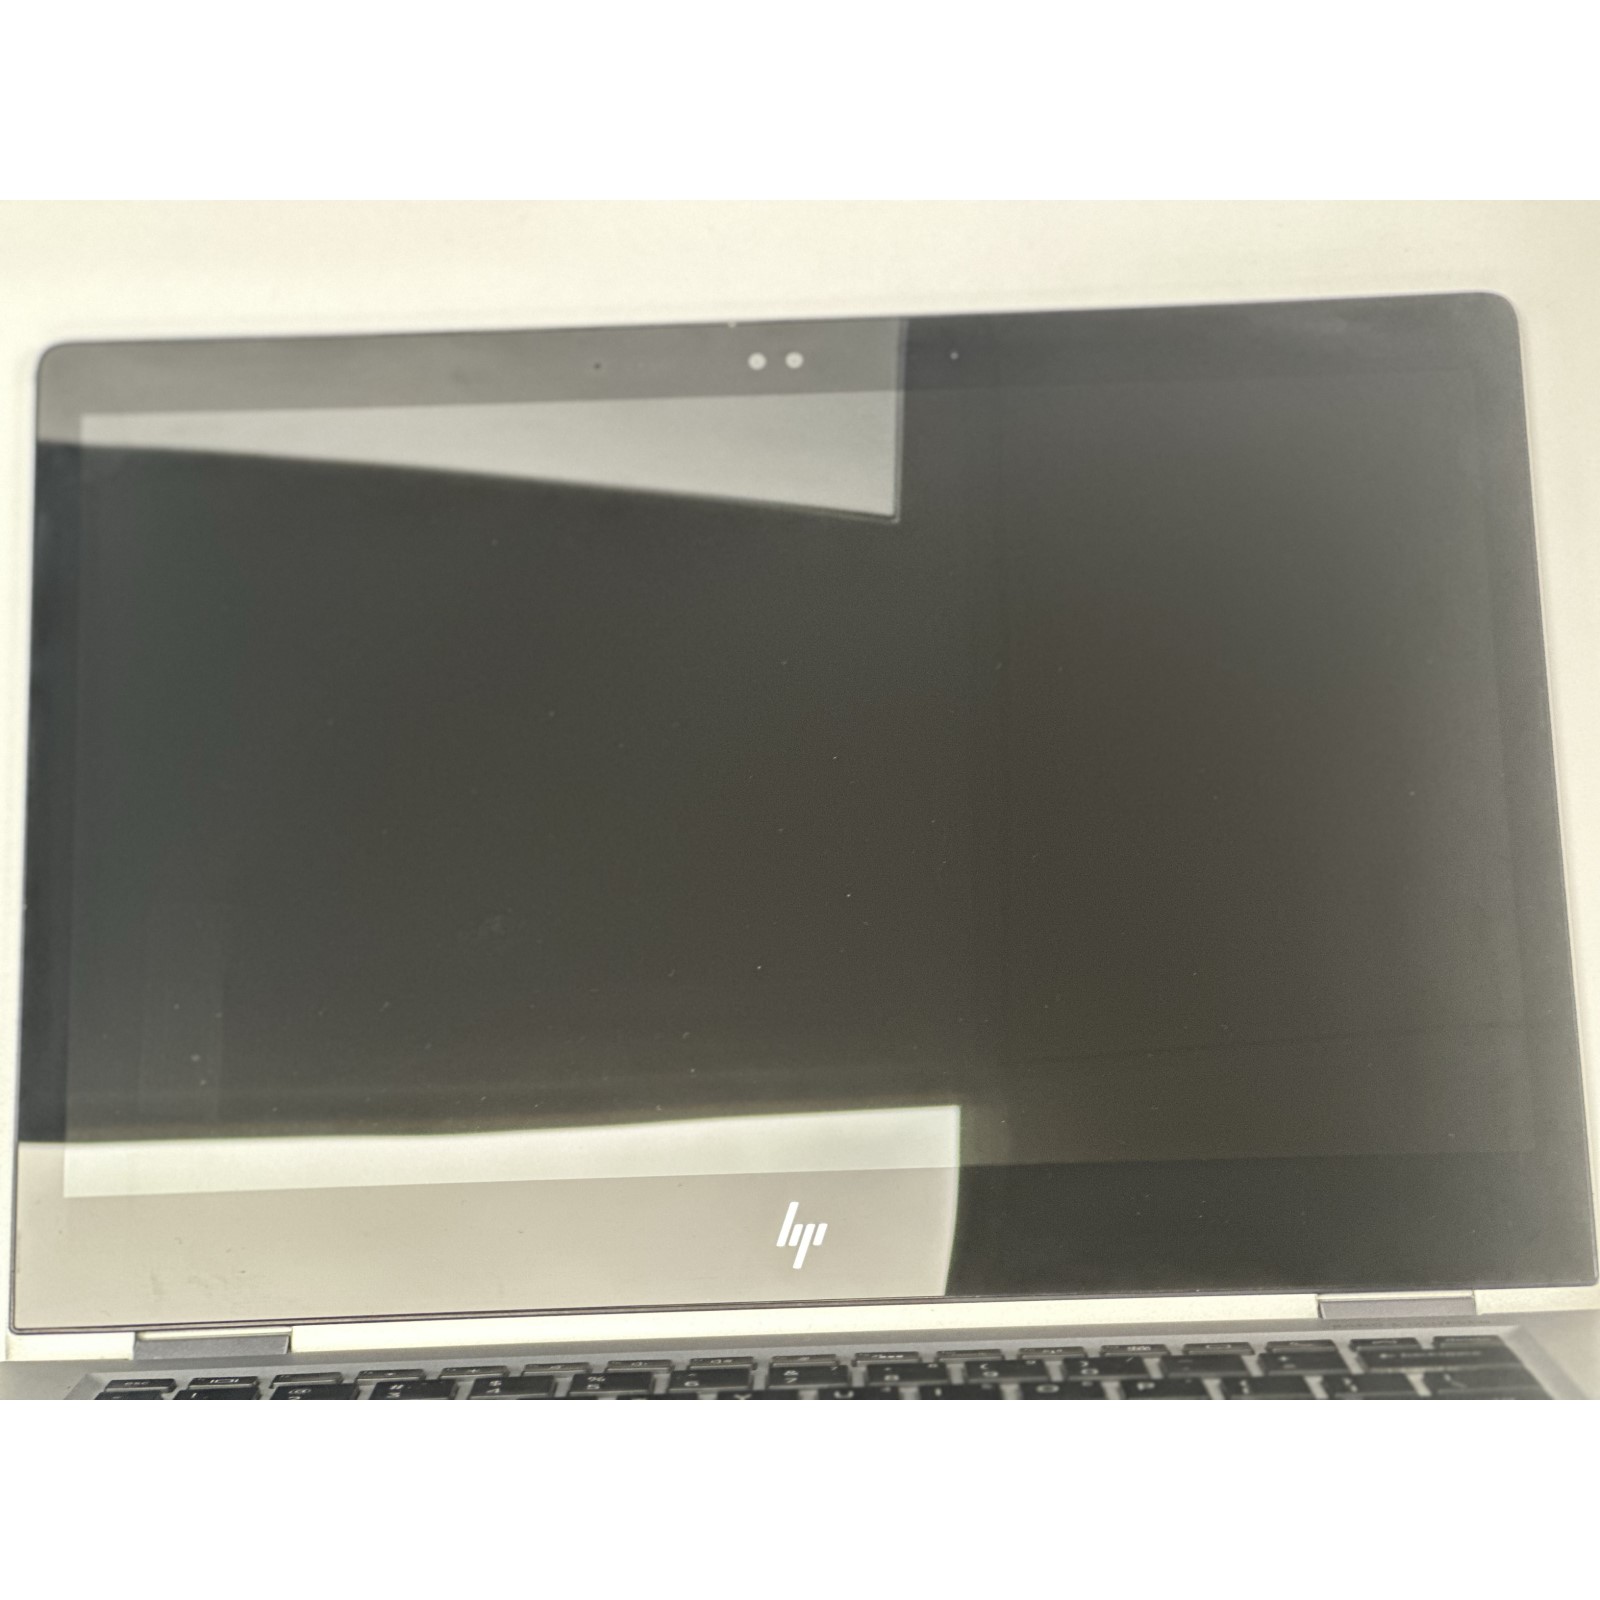 Picture of HP EliteBook x360 1030 G2 13.3" UHD i7-7600 16GB 512GB W11 - Used Good Condition